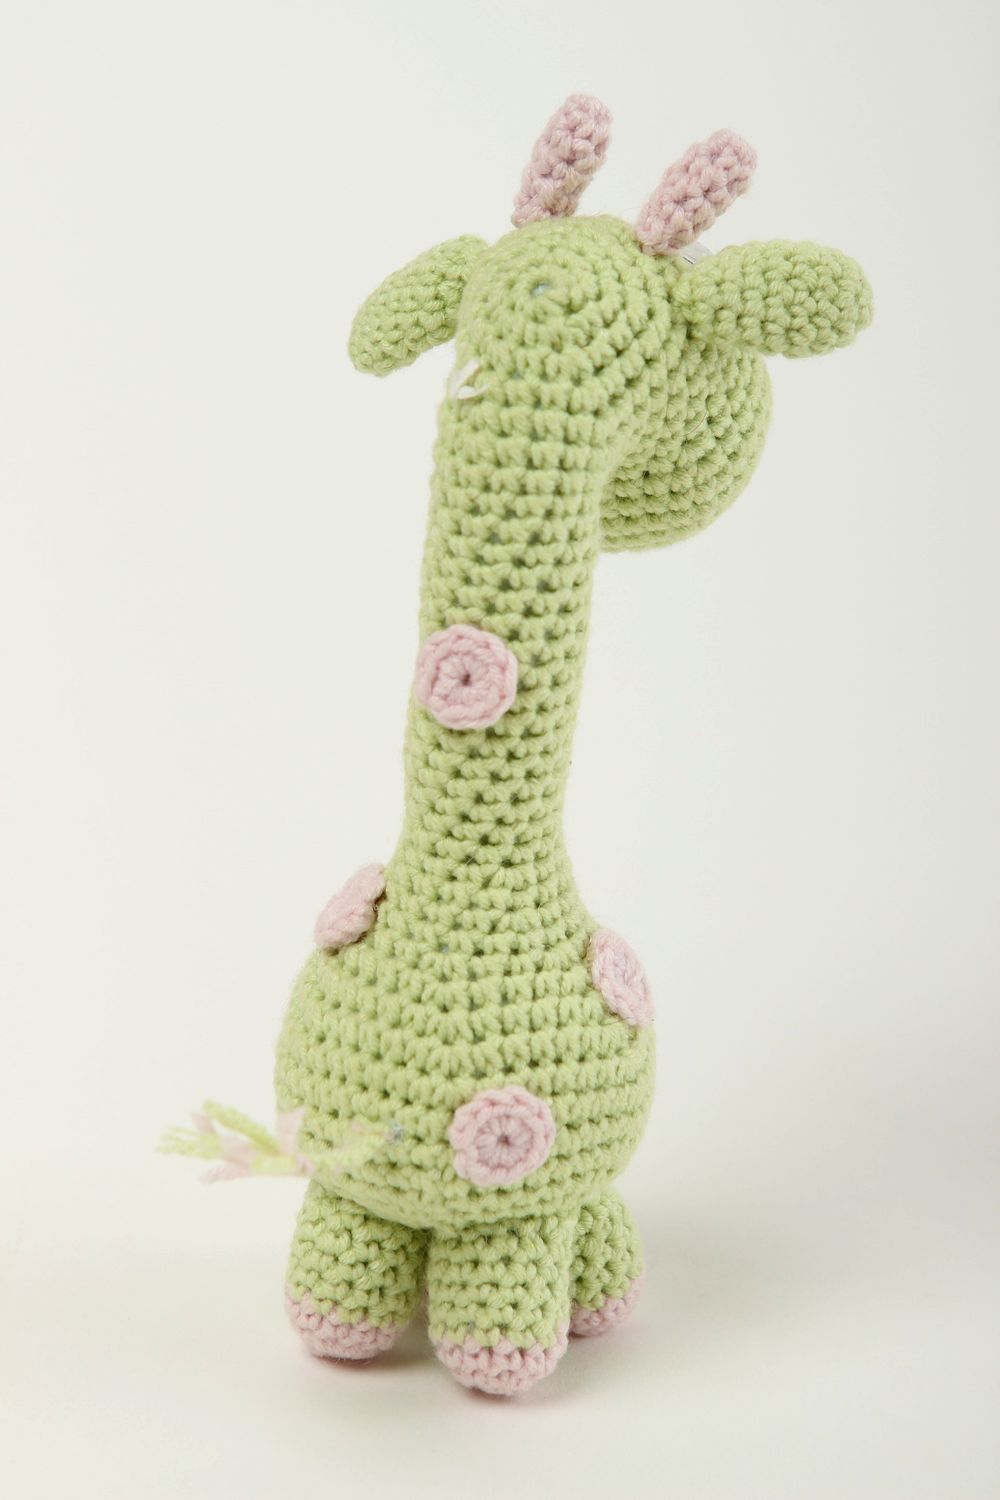 Handmade soft toy giraffe baby toy decorative crocheted toy cute toy for kids photo 4